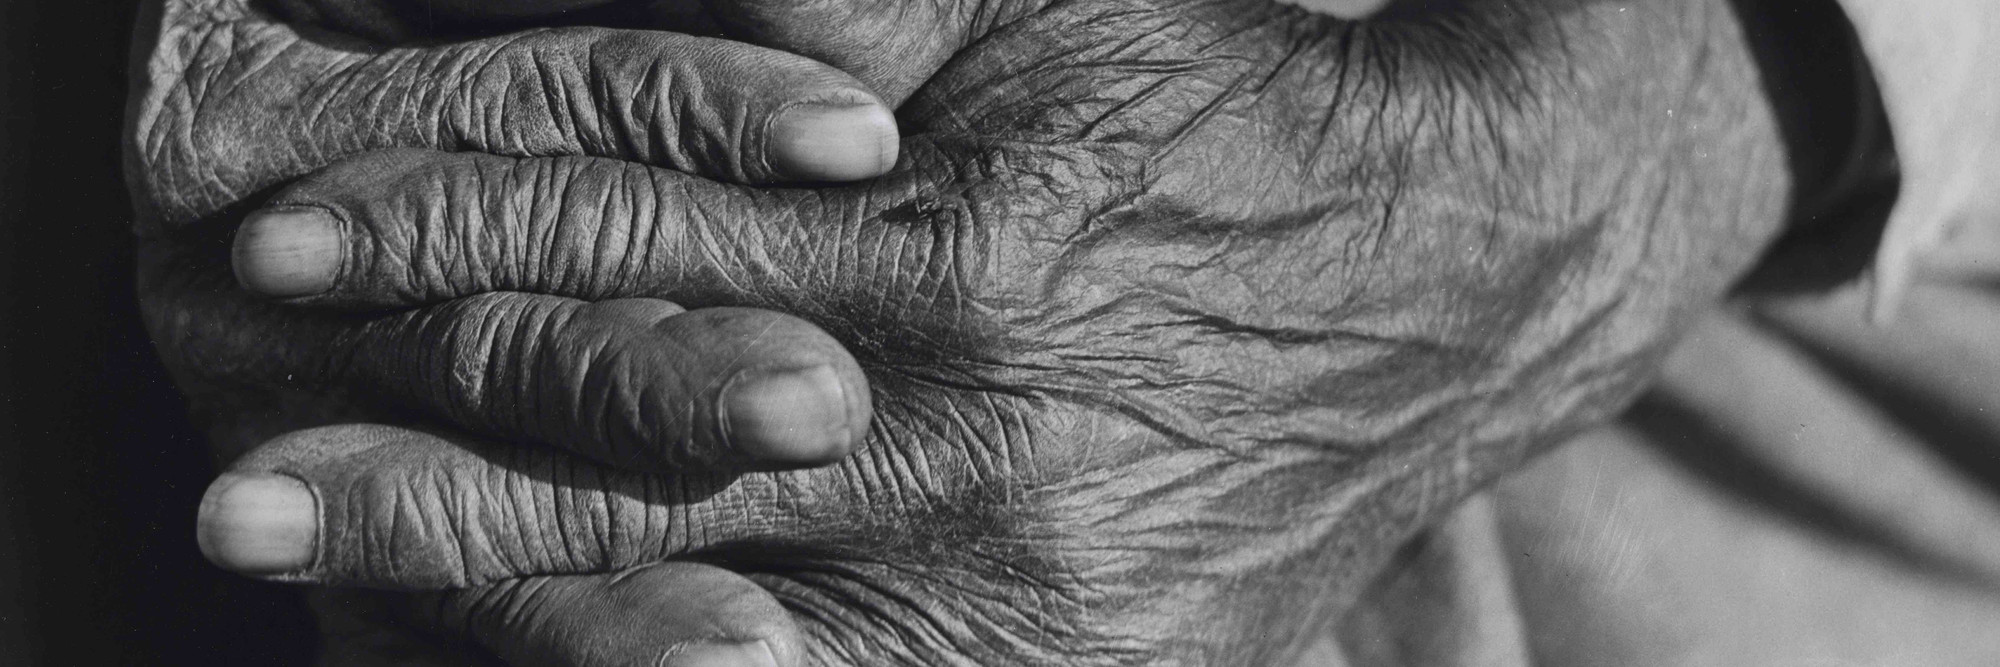 Jack Delano. Hands of Mr. Henry Brooks, ex-slave. Parks Ferry Road, Greene County, Georgia. May 1941. Gelatin silver print, 10 11/16 × 13 3/4 in. (27.2 × 34.9 cm). The Museum of Modern Art, New York. Purchase. © Jack Delano/Library of Congress